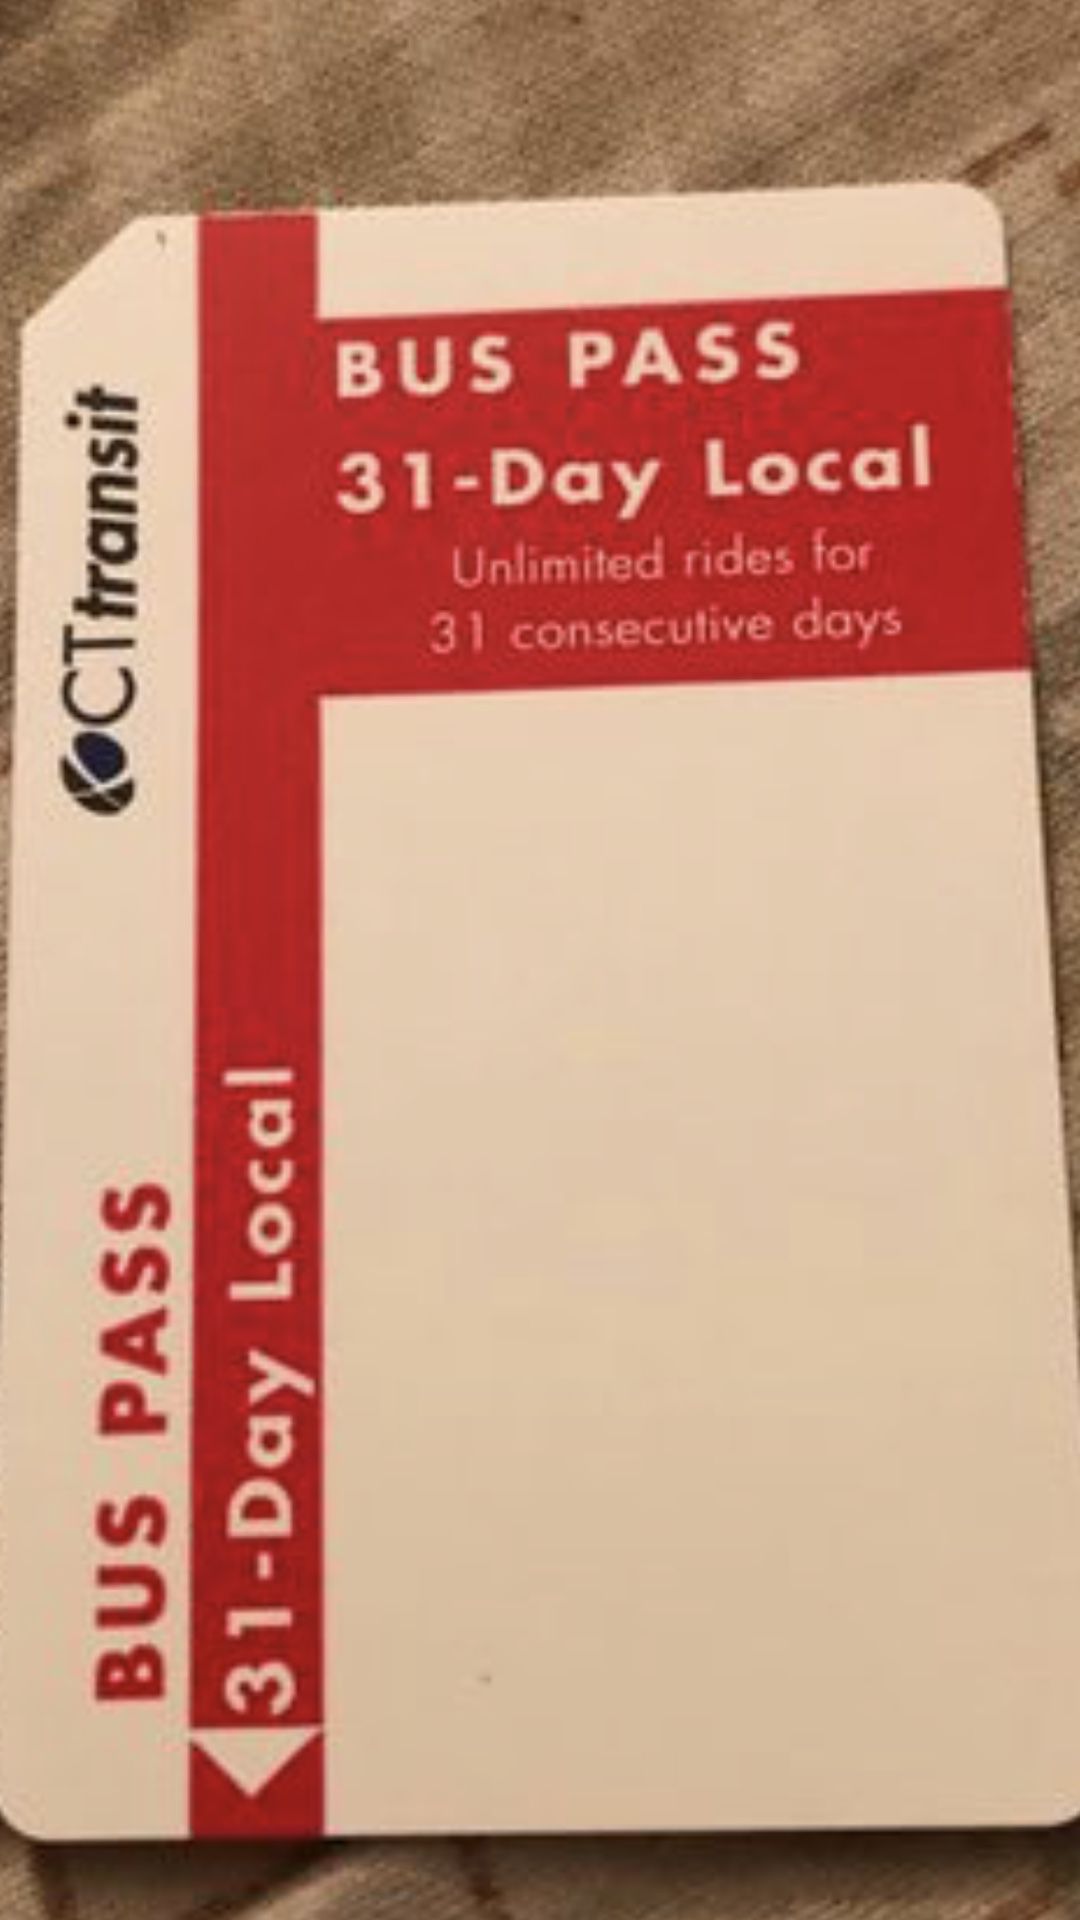 CT 31 Day Bus Card For Sale $50 or BEST OFFER